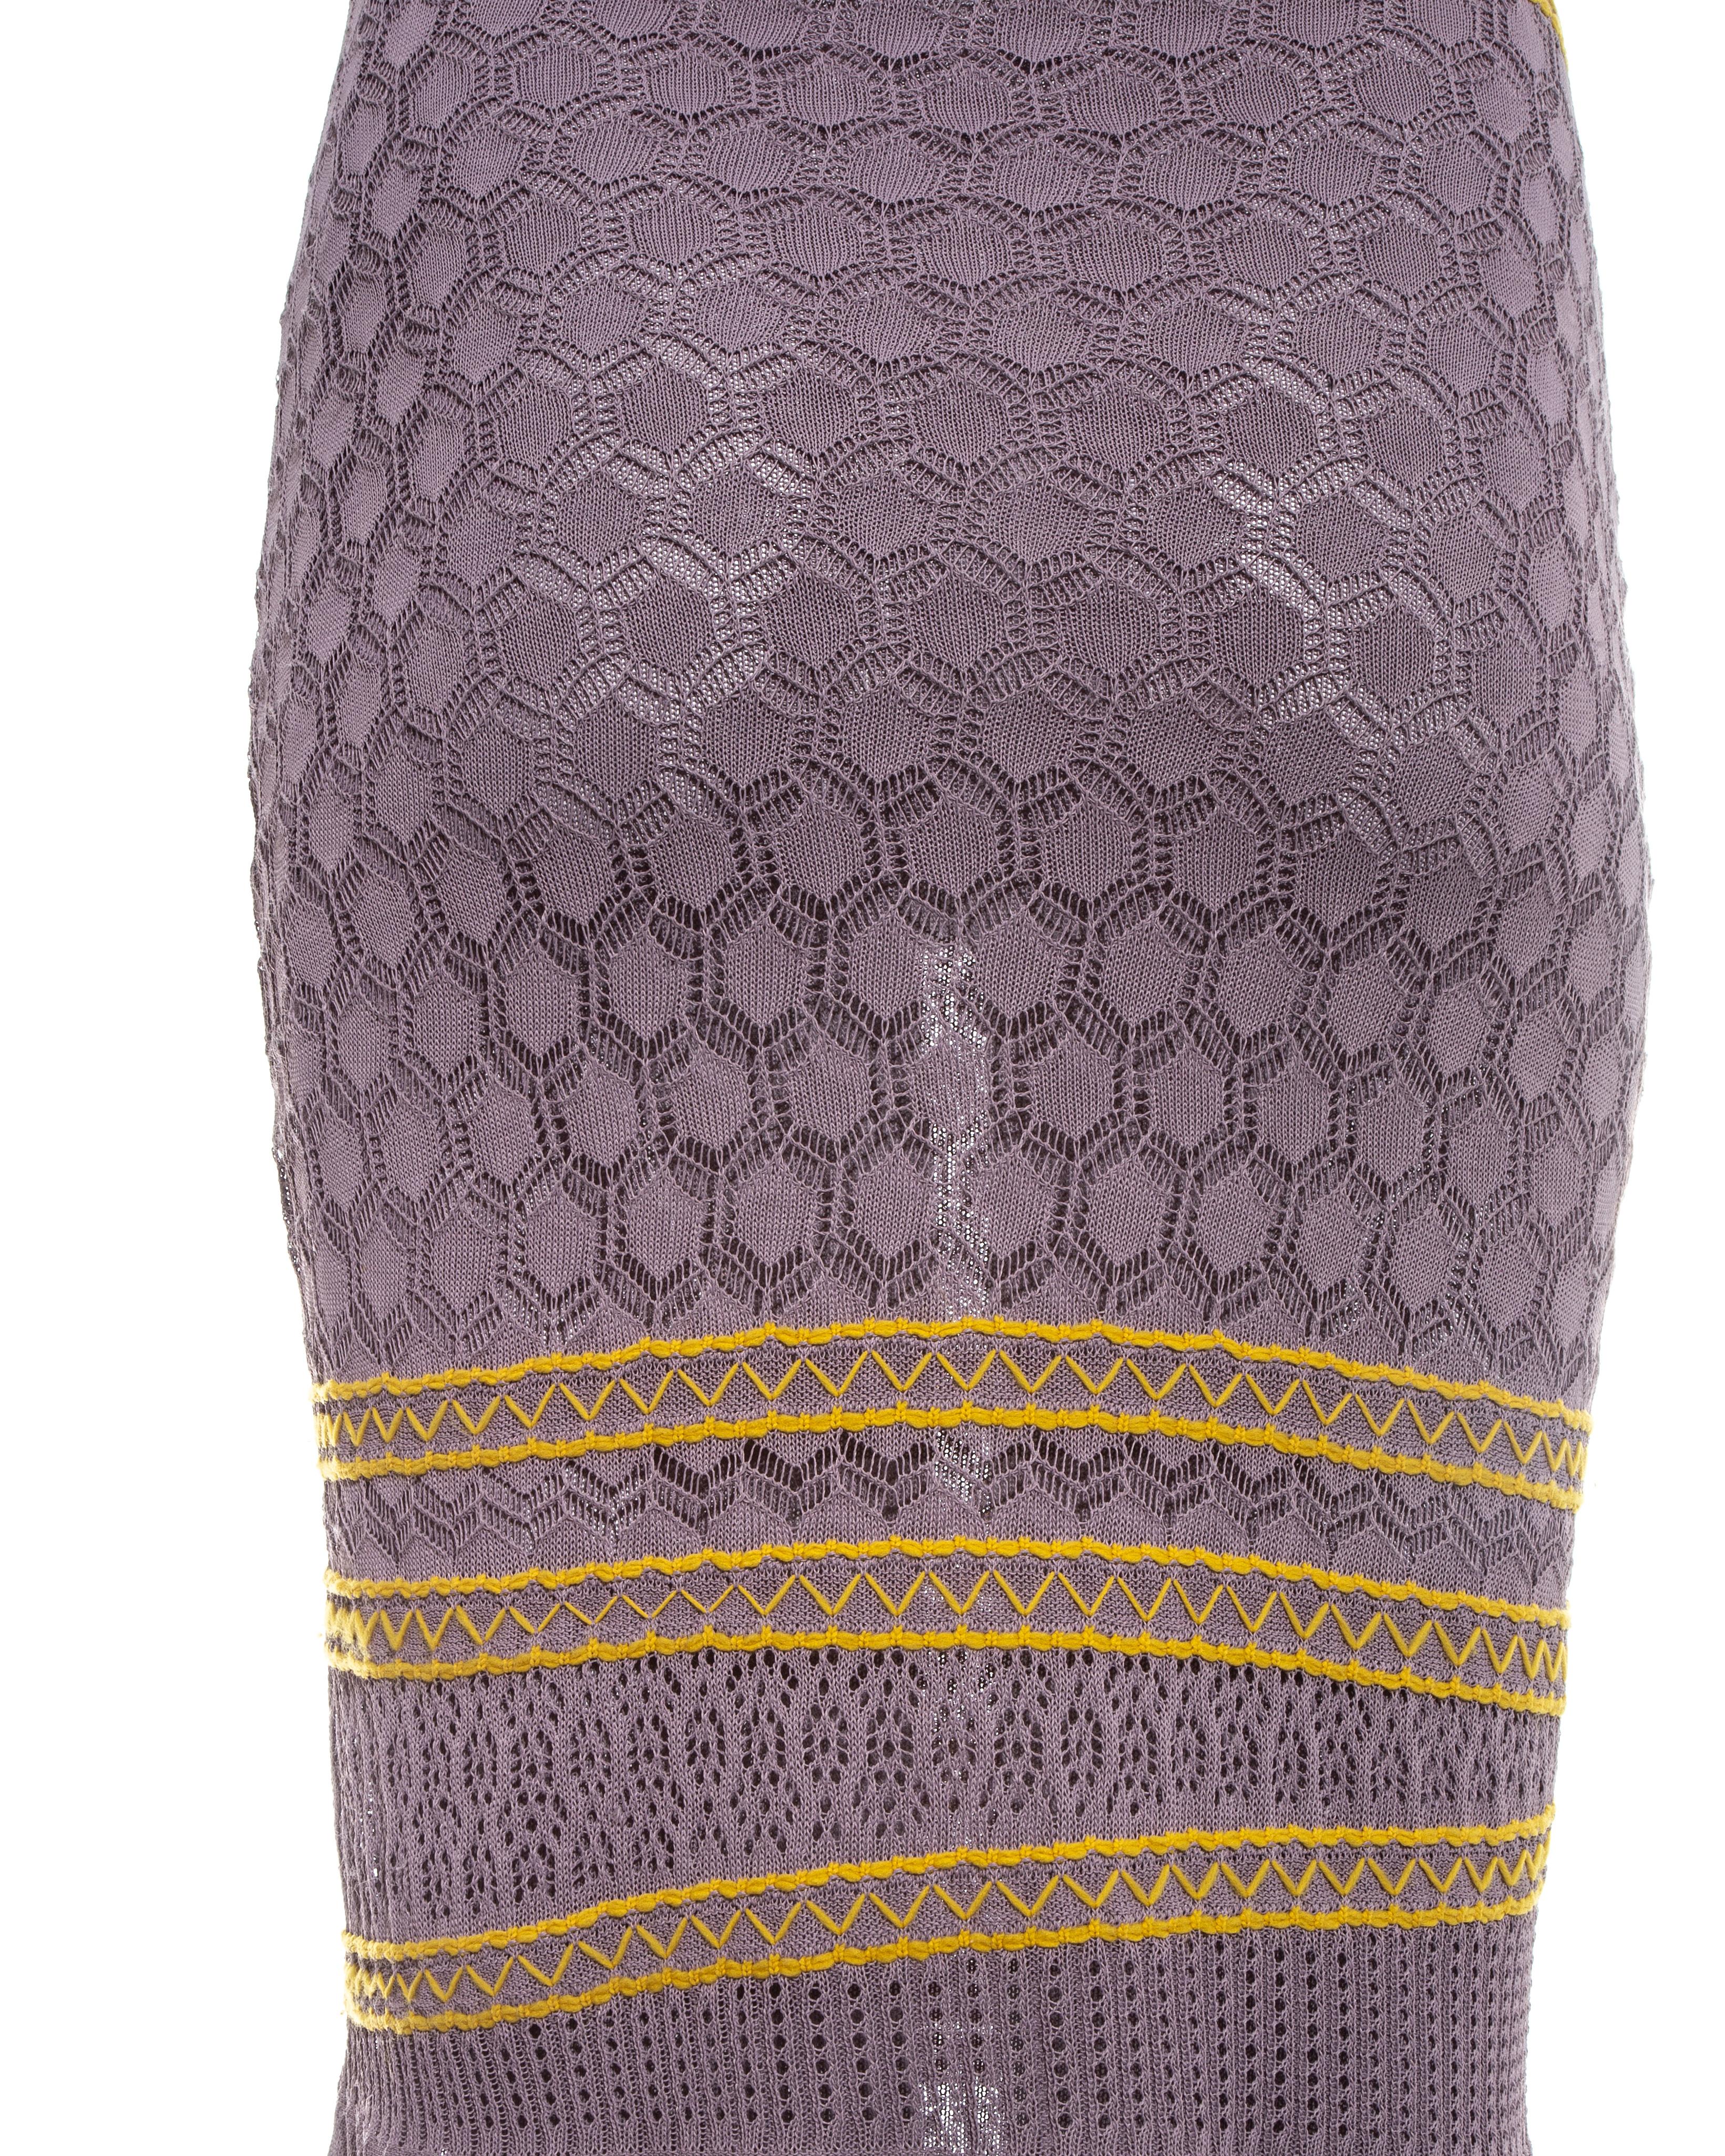 Christian Dior by John Galliano violet knitted slip dress, ss 2000 2